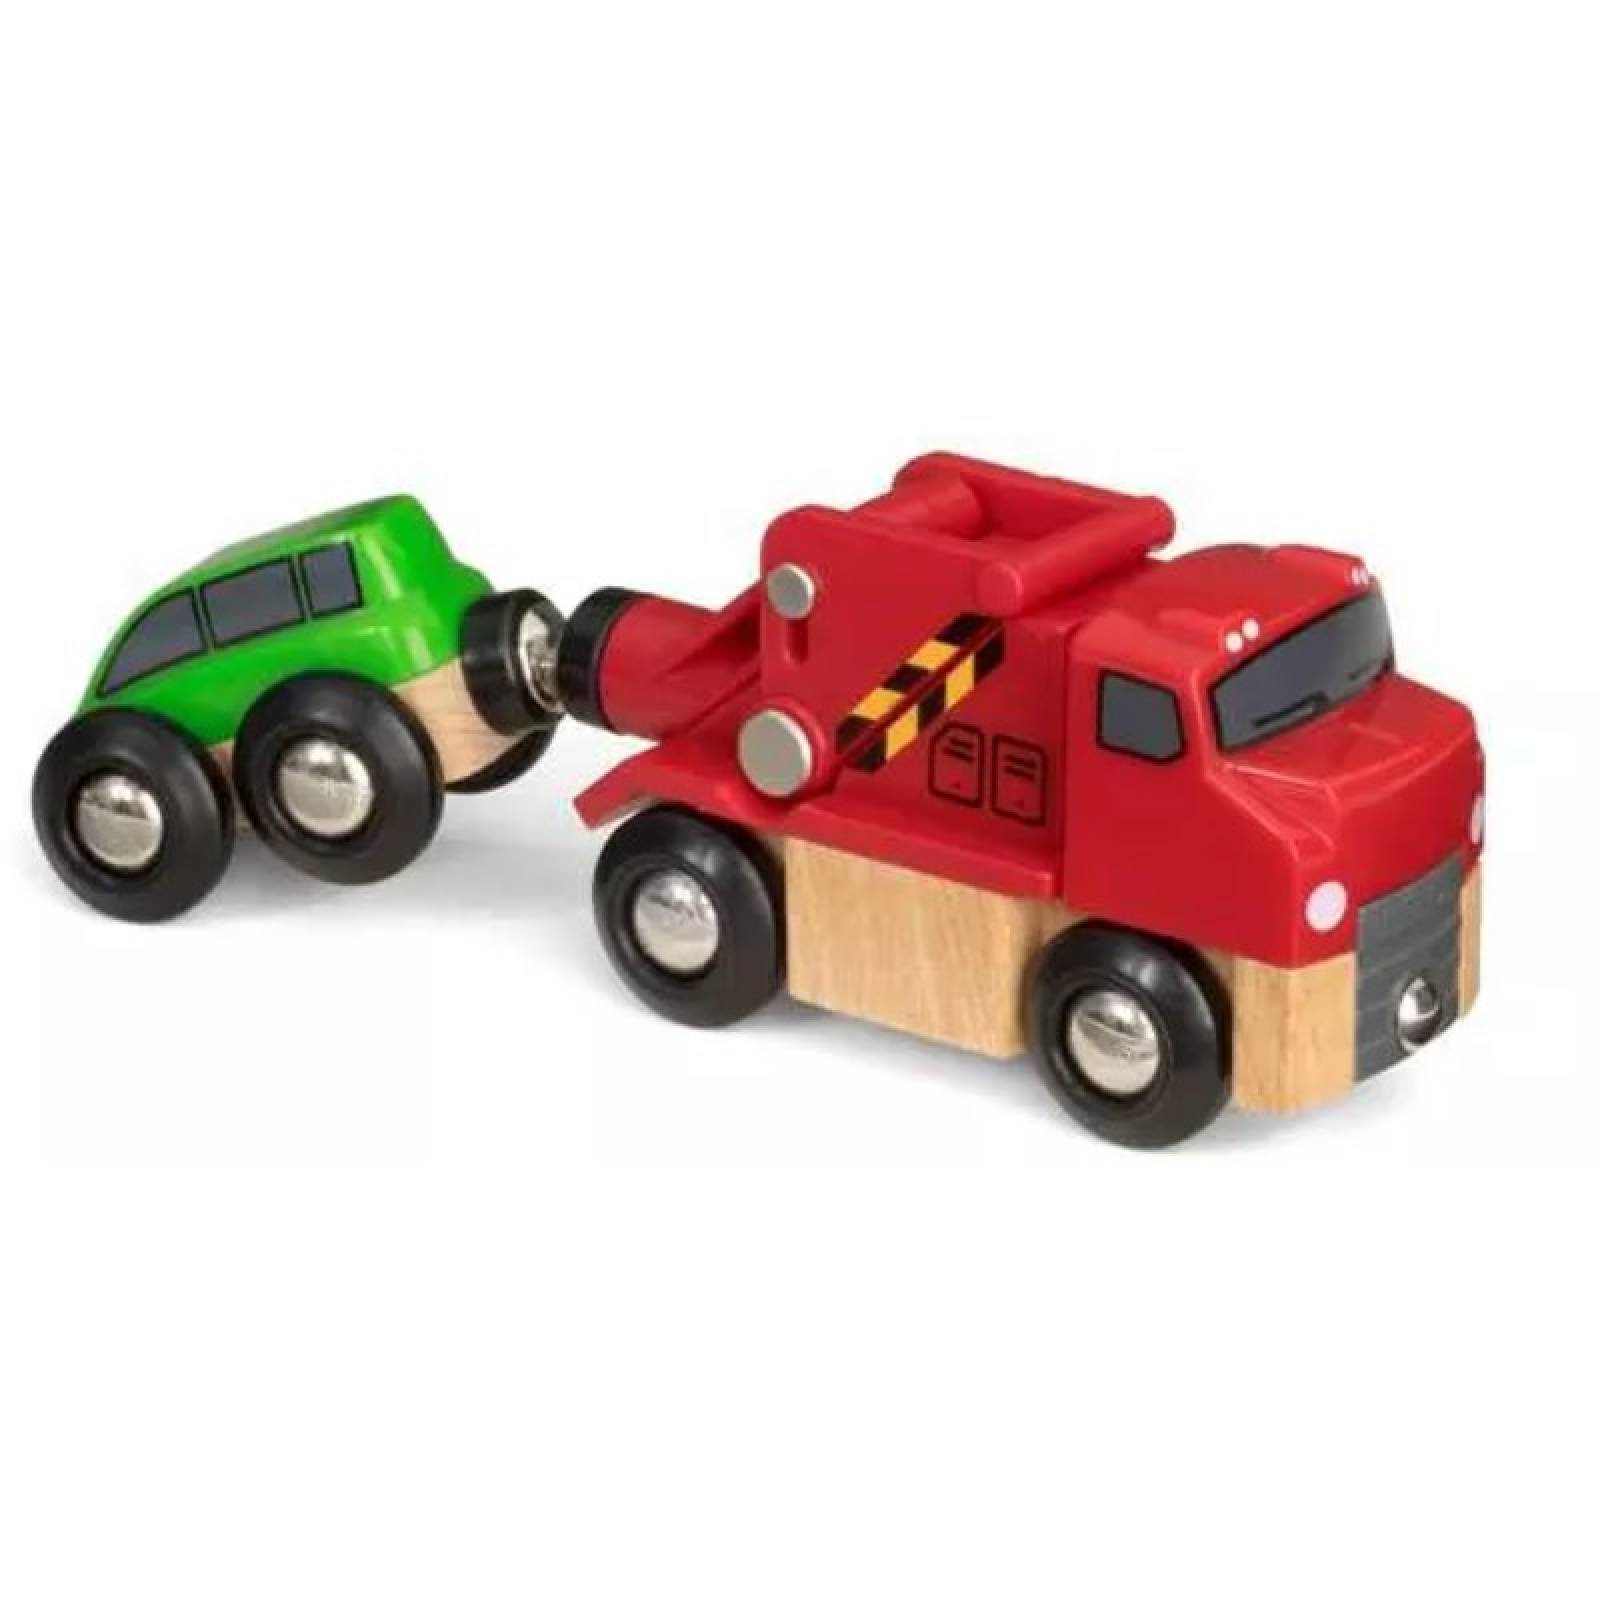 Tow Truck By Brio Wooden Railway 3+ thumbnails